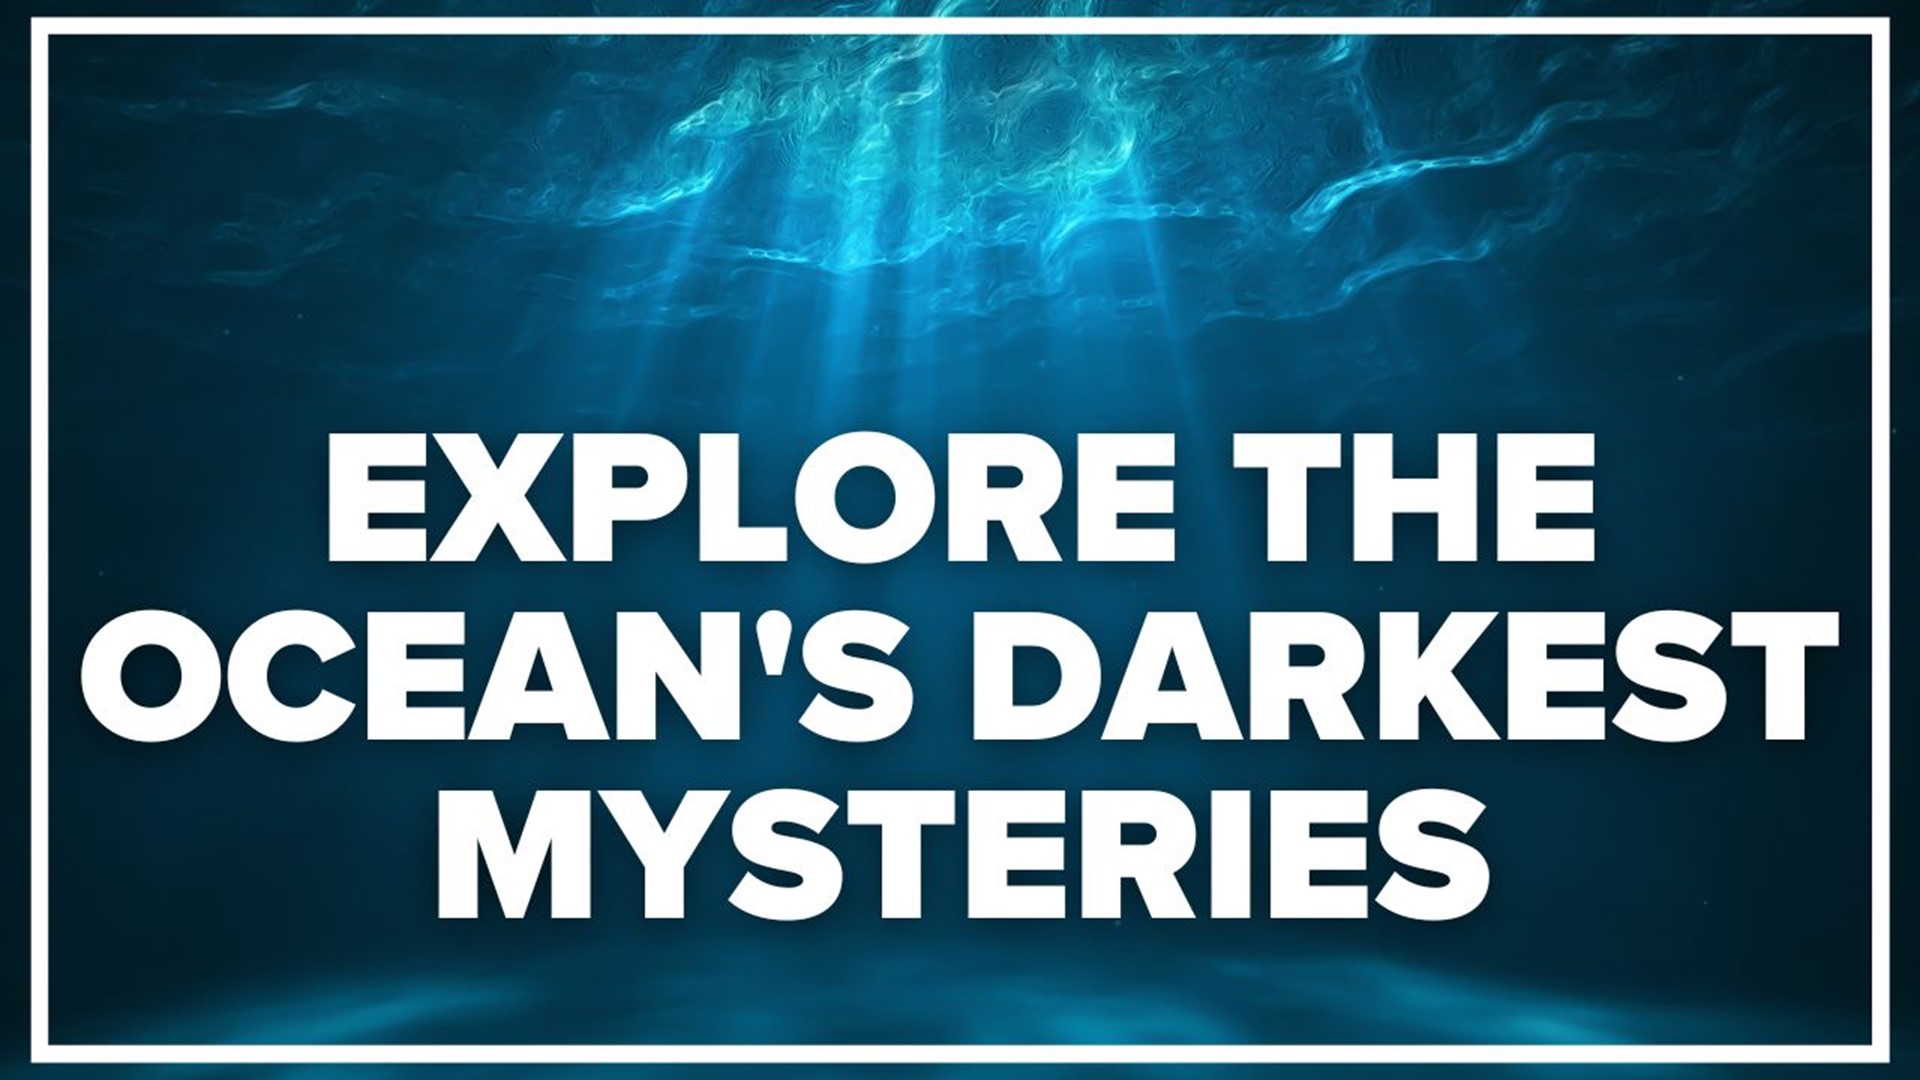 Unseen Oceans explores the darkest depths and examines the sea life that inhabits these mysterious spaces.